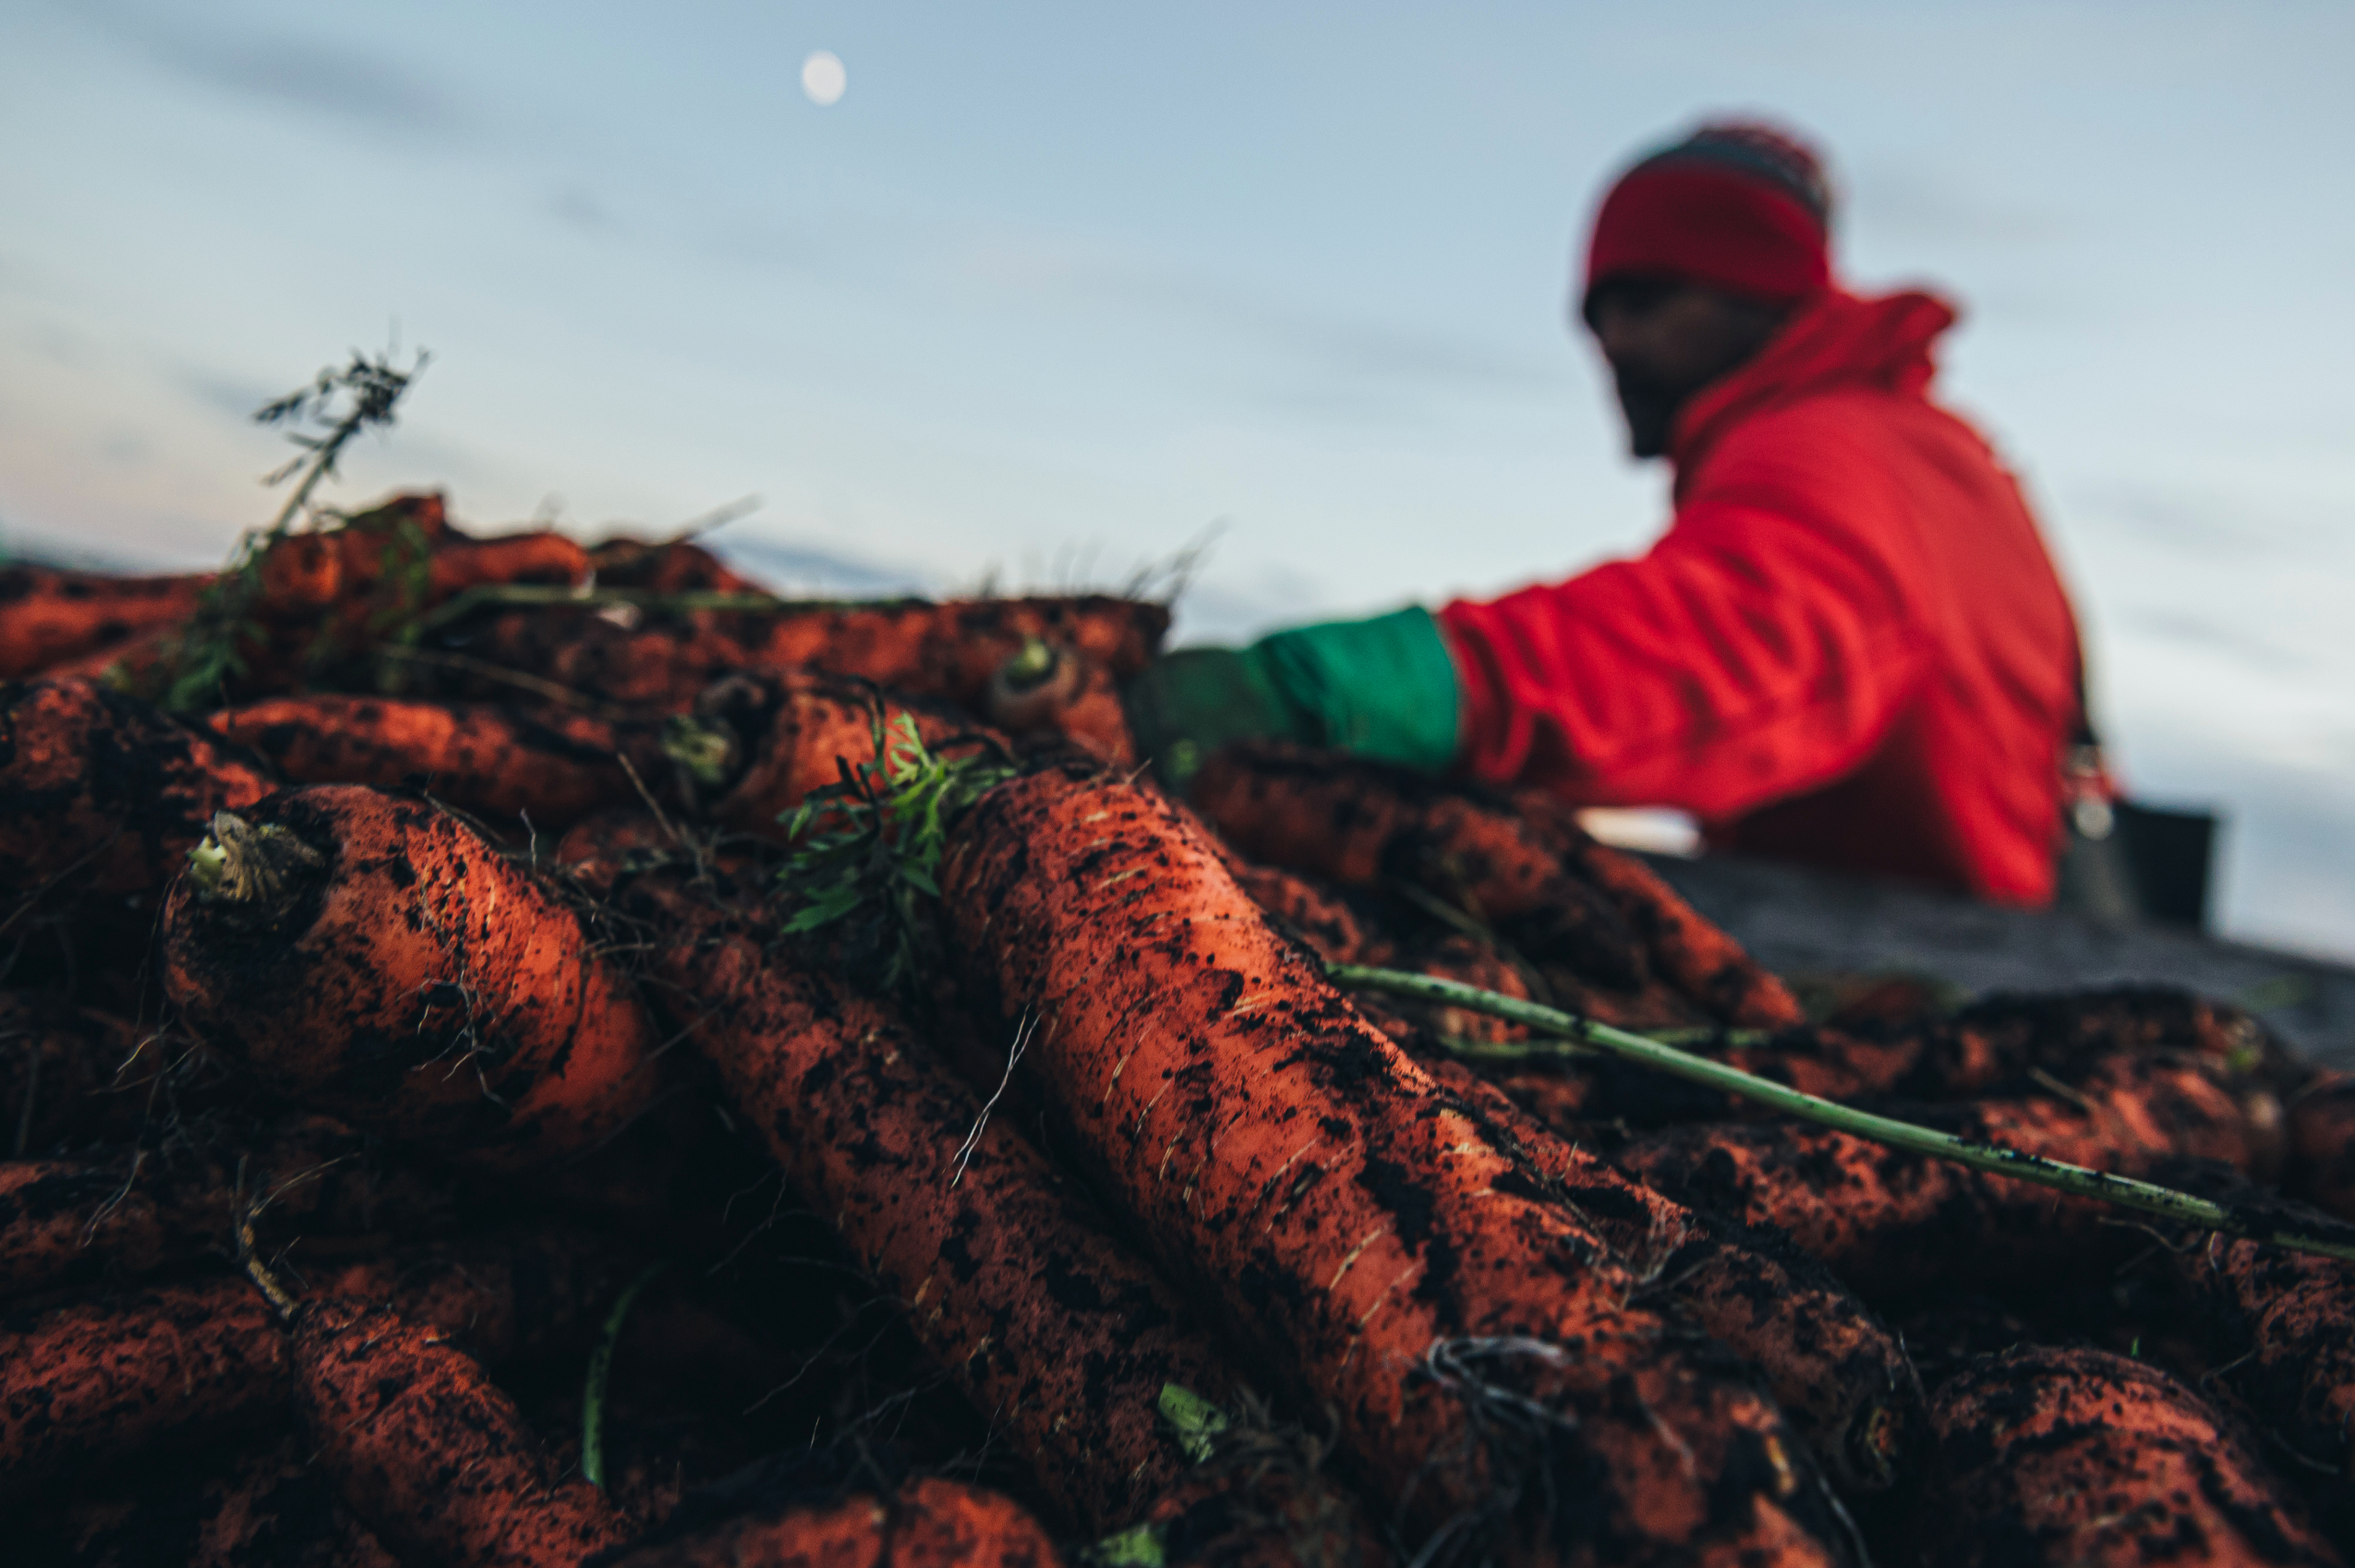 Holland Marsh: A worker handles freshly harvested carrots that are covered in dirt